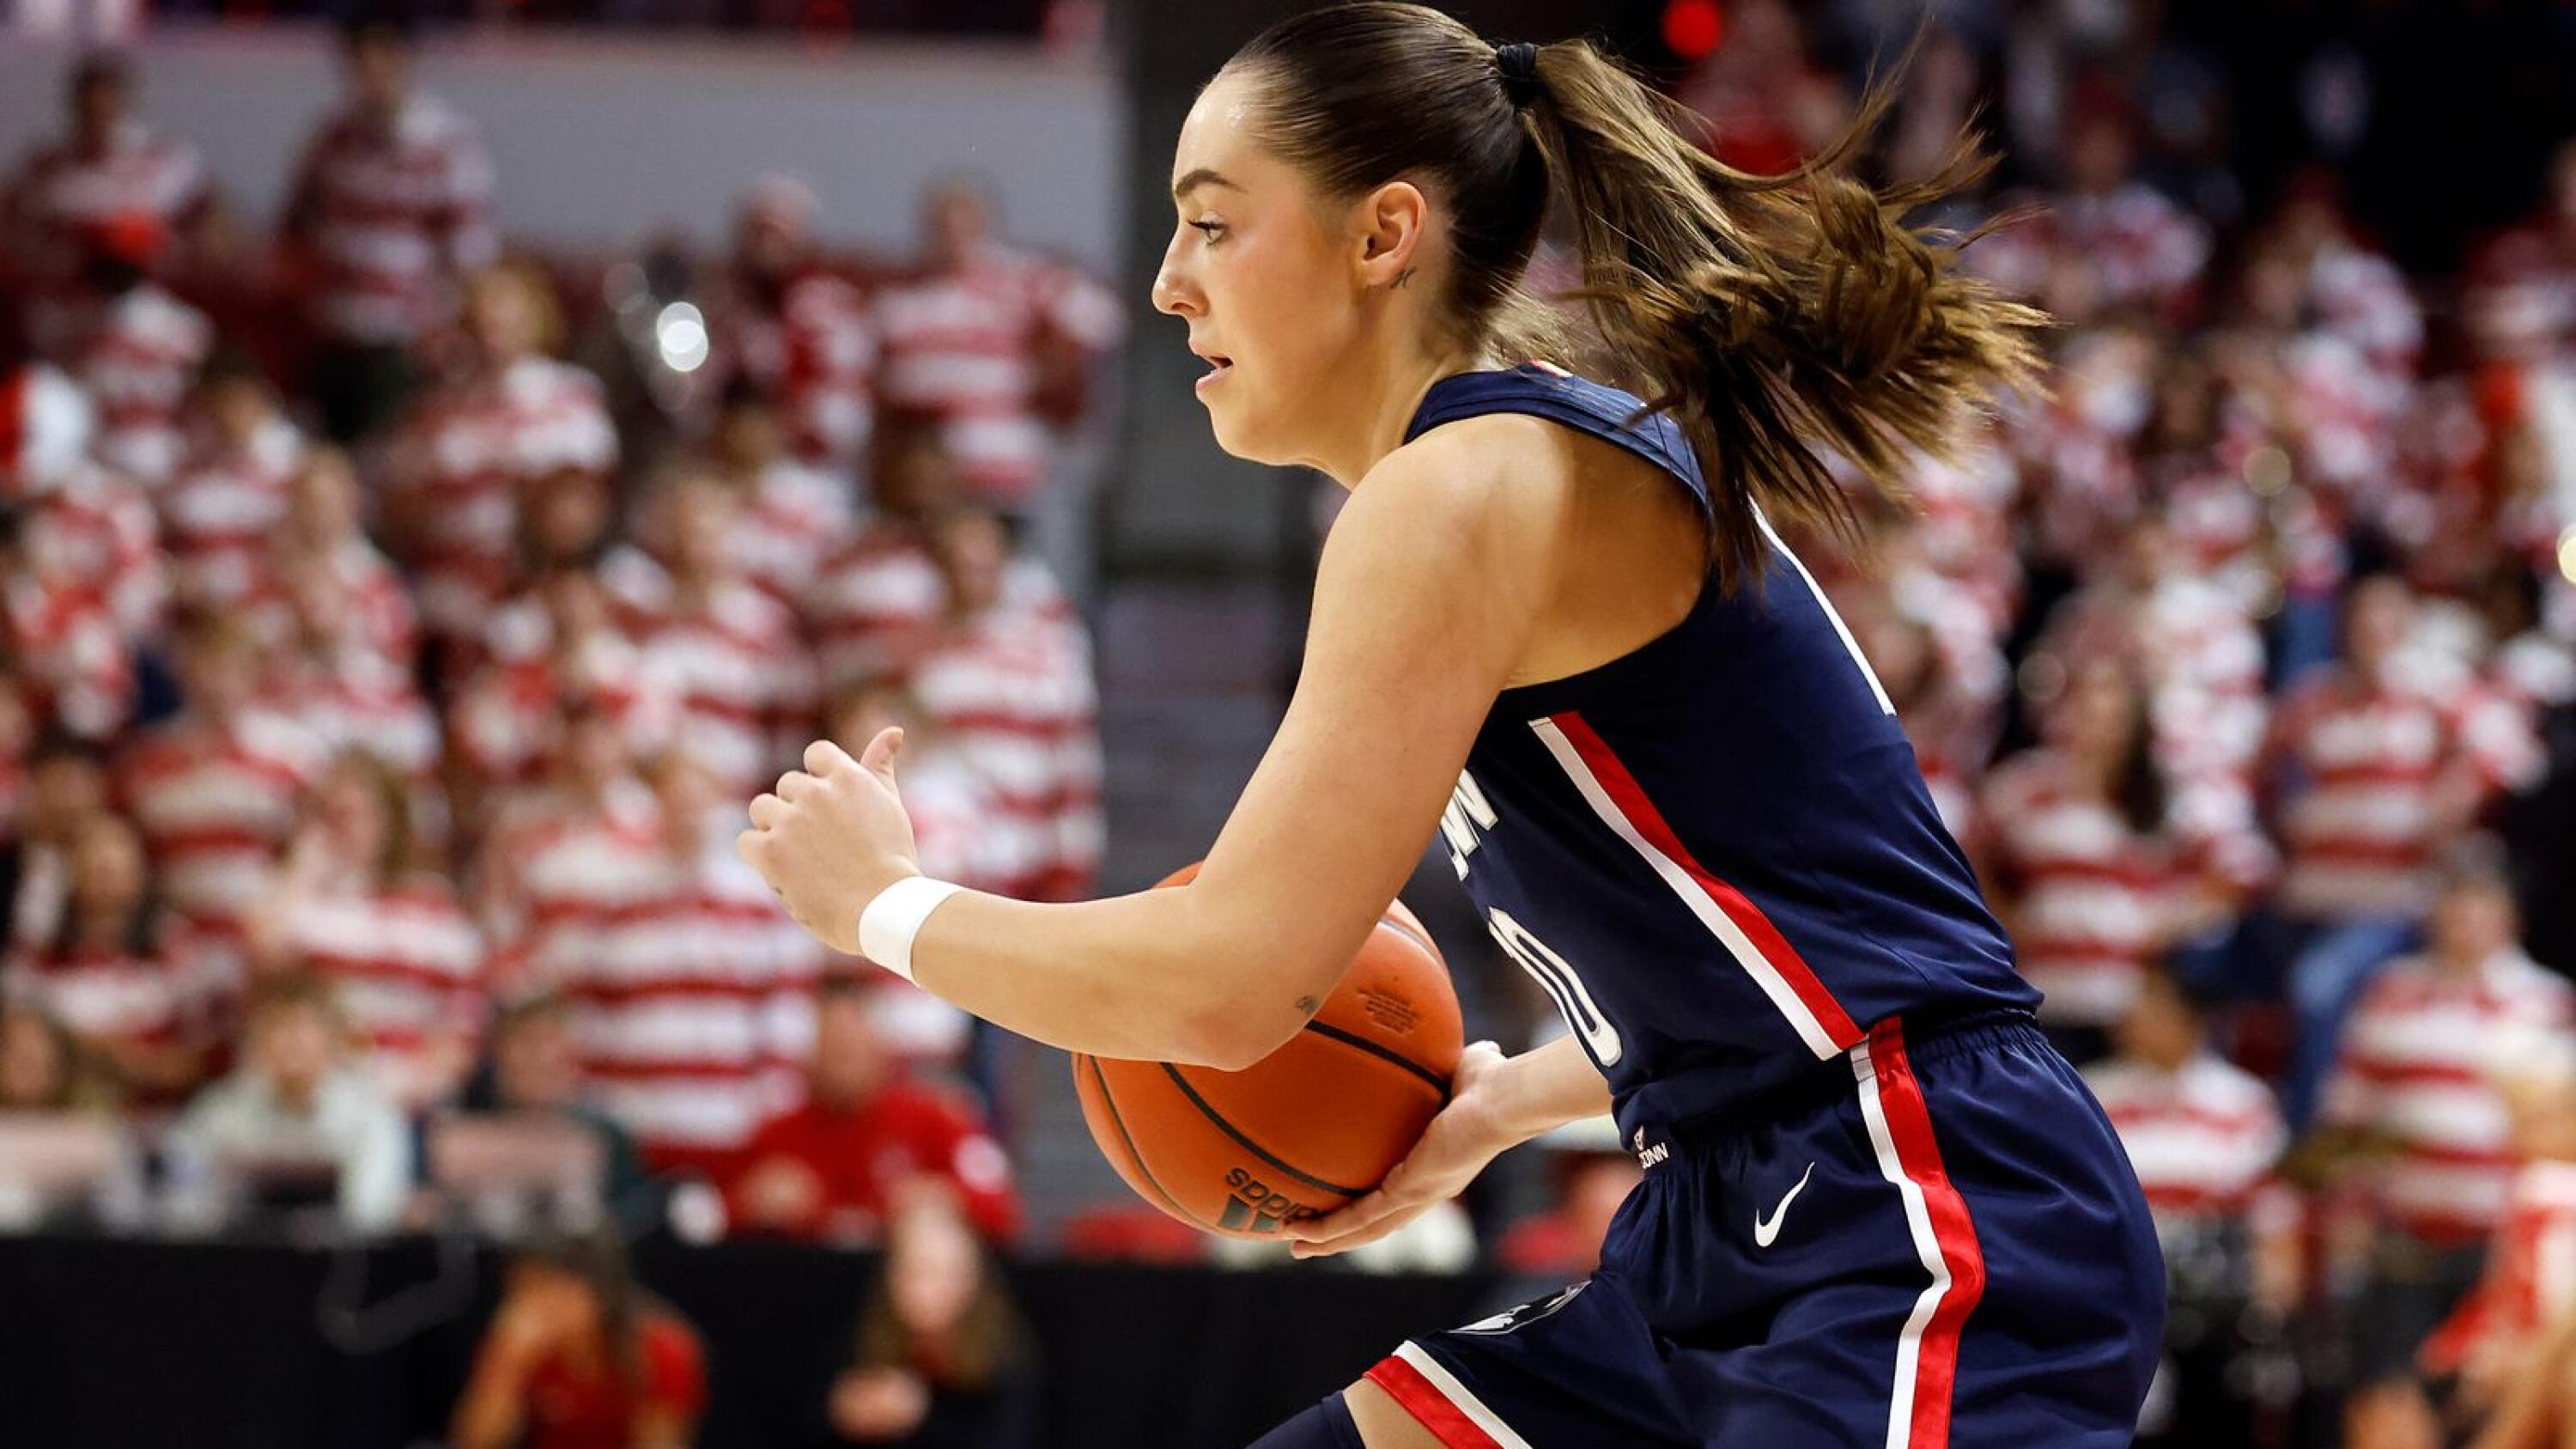 Trash Talk' Really Can Put Players Off Their Game, UConn